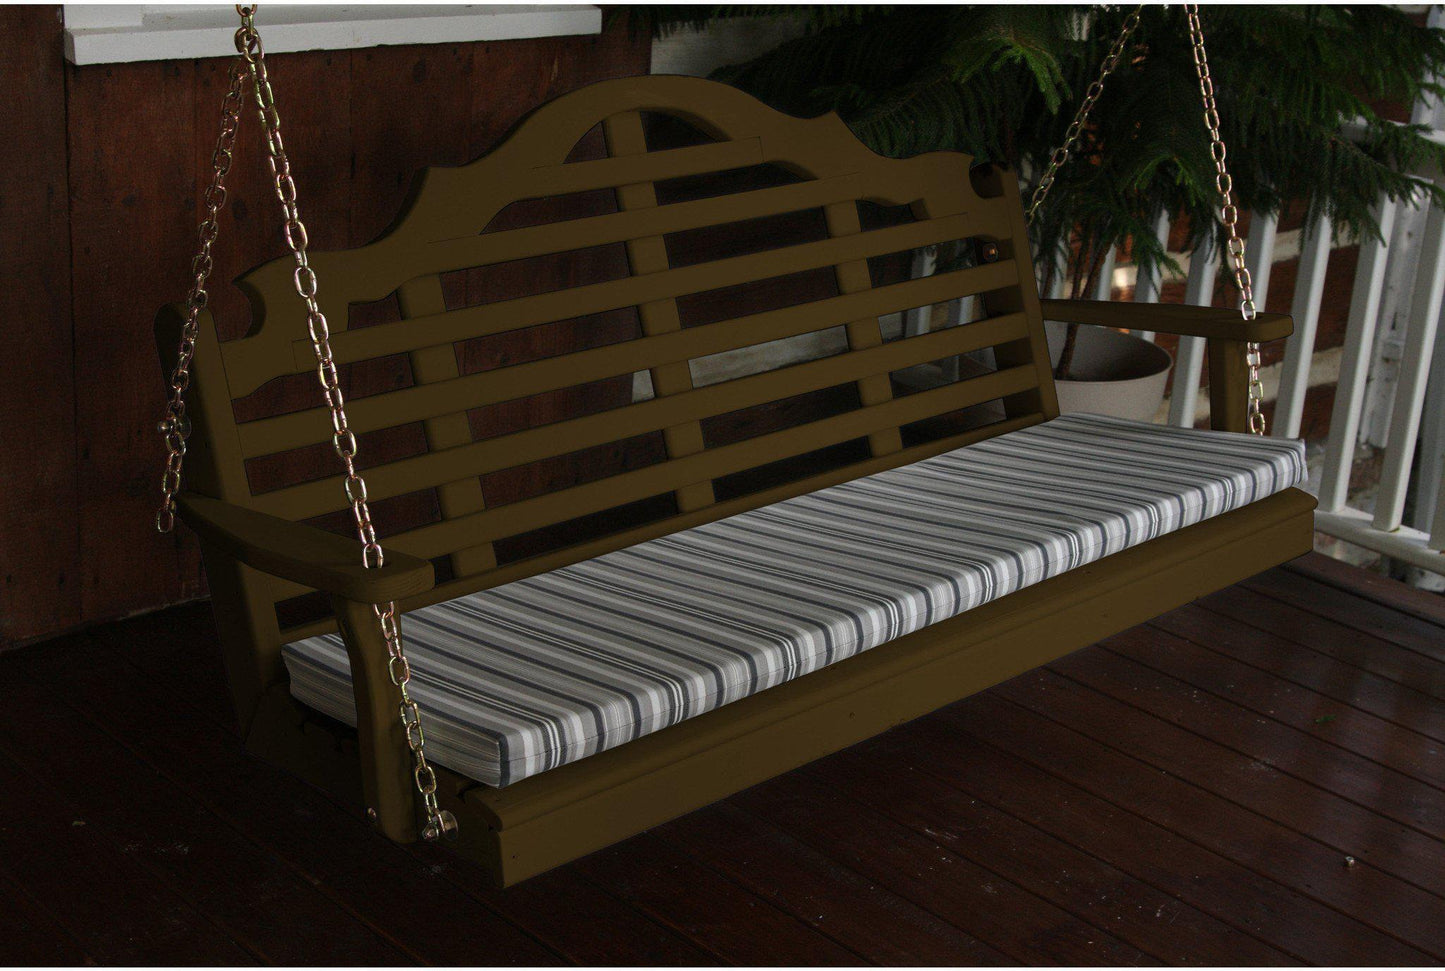 A & L Furniture Marlboro Yellow Pine 6ft Porch Swing  - Ships FREE in 5-7 Business days - Rocking Furniture